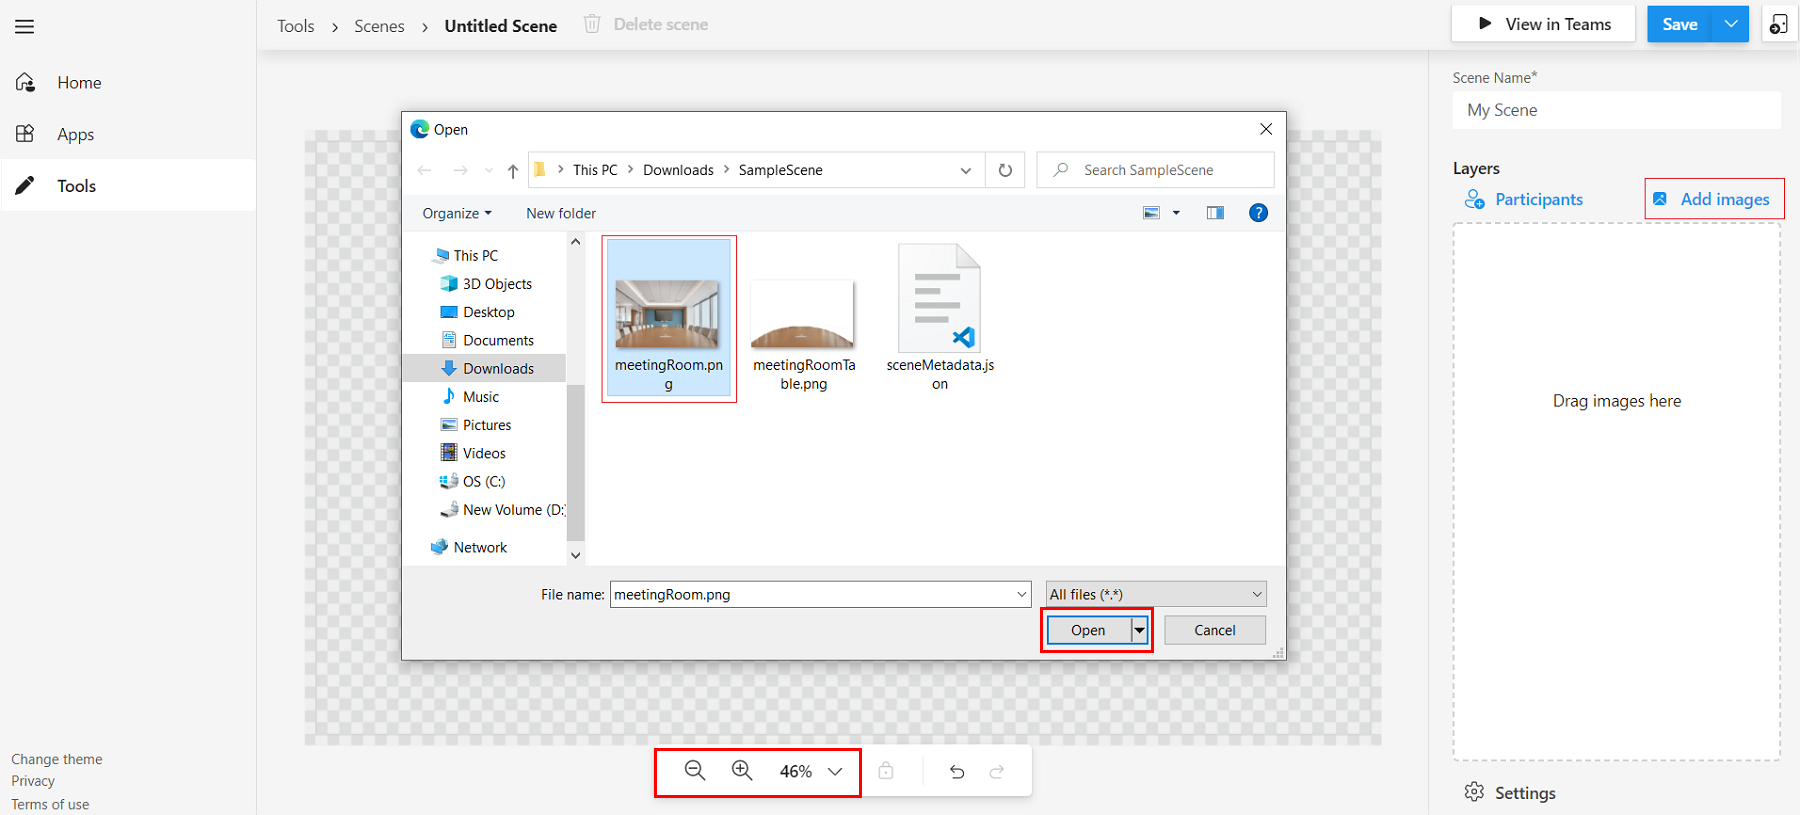 Screenshot shows the option to add images to the scene in scene studio.